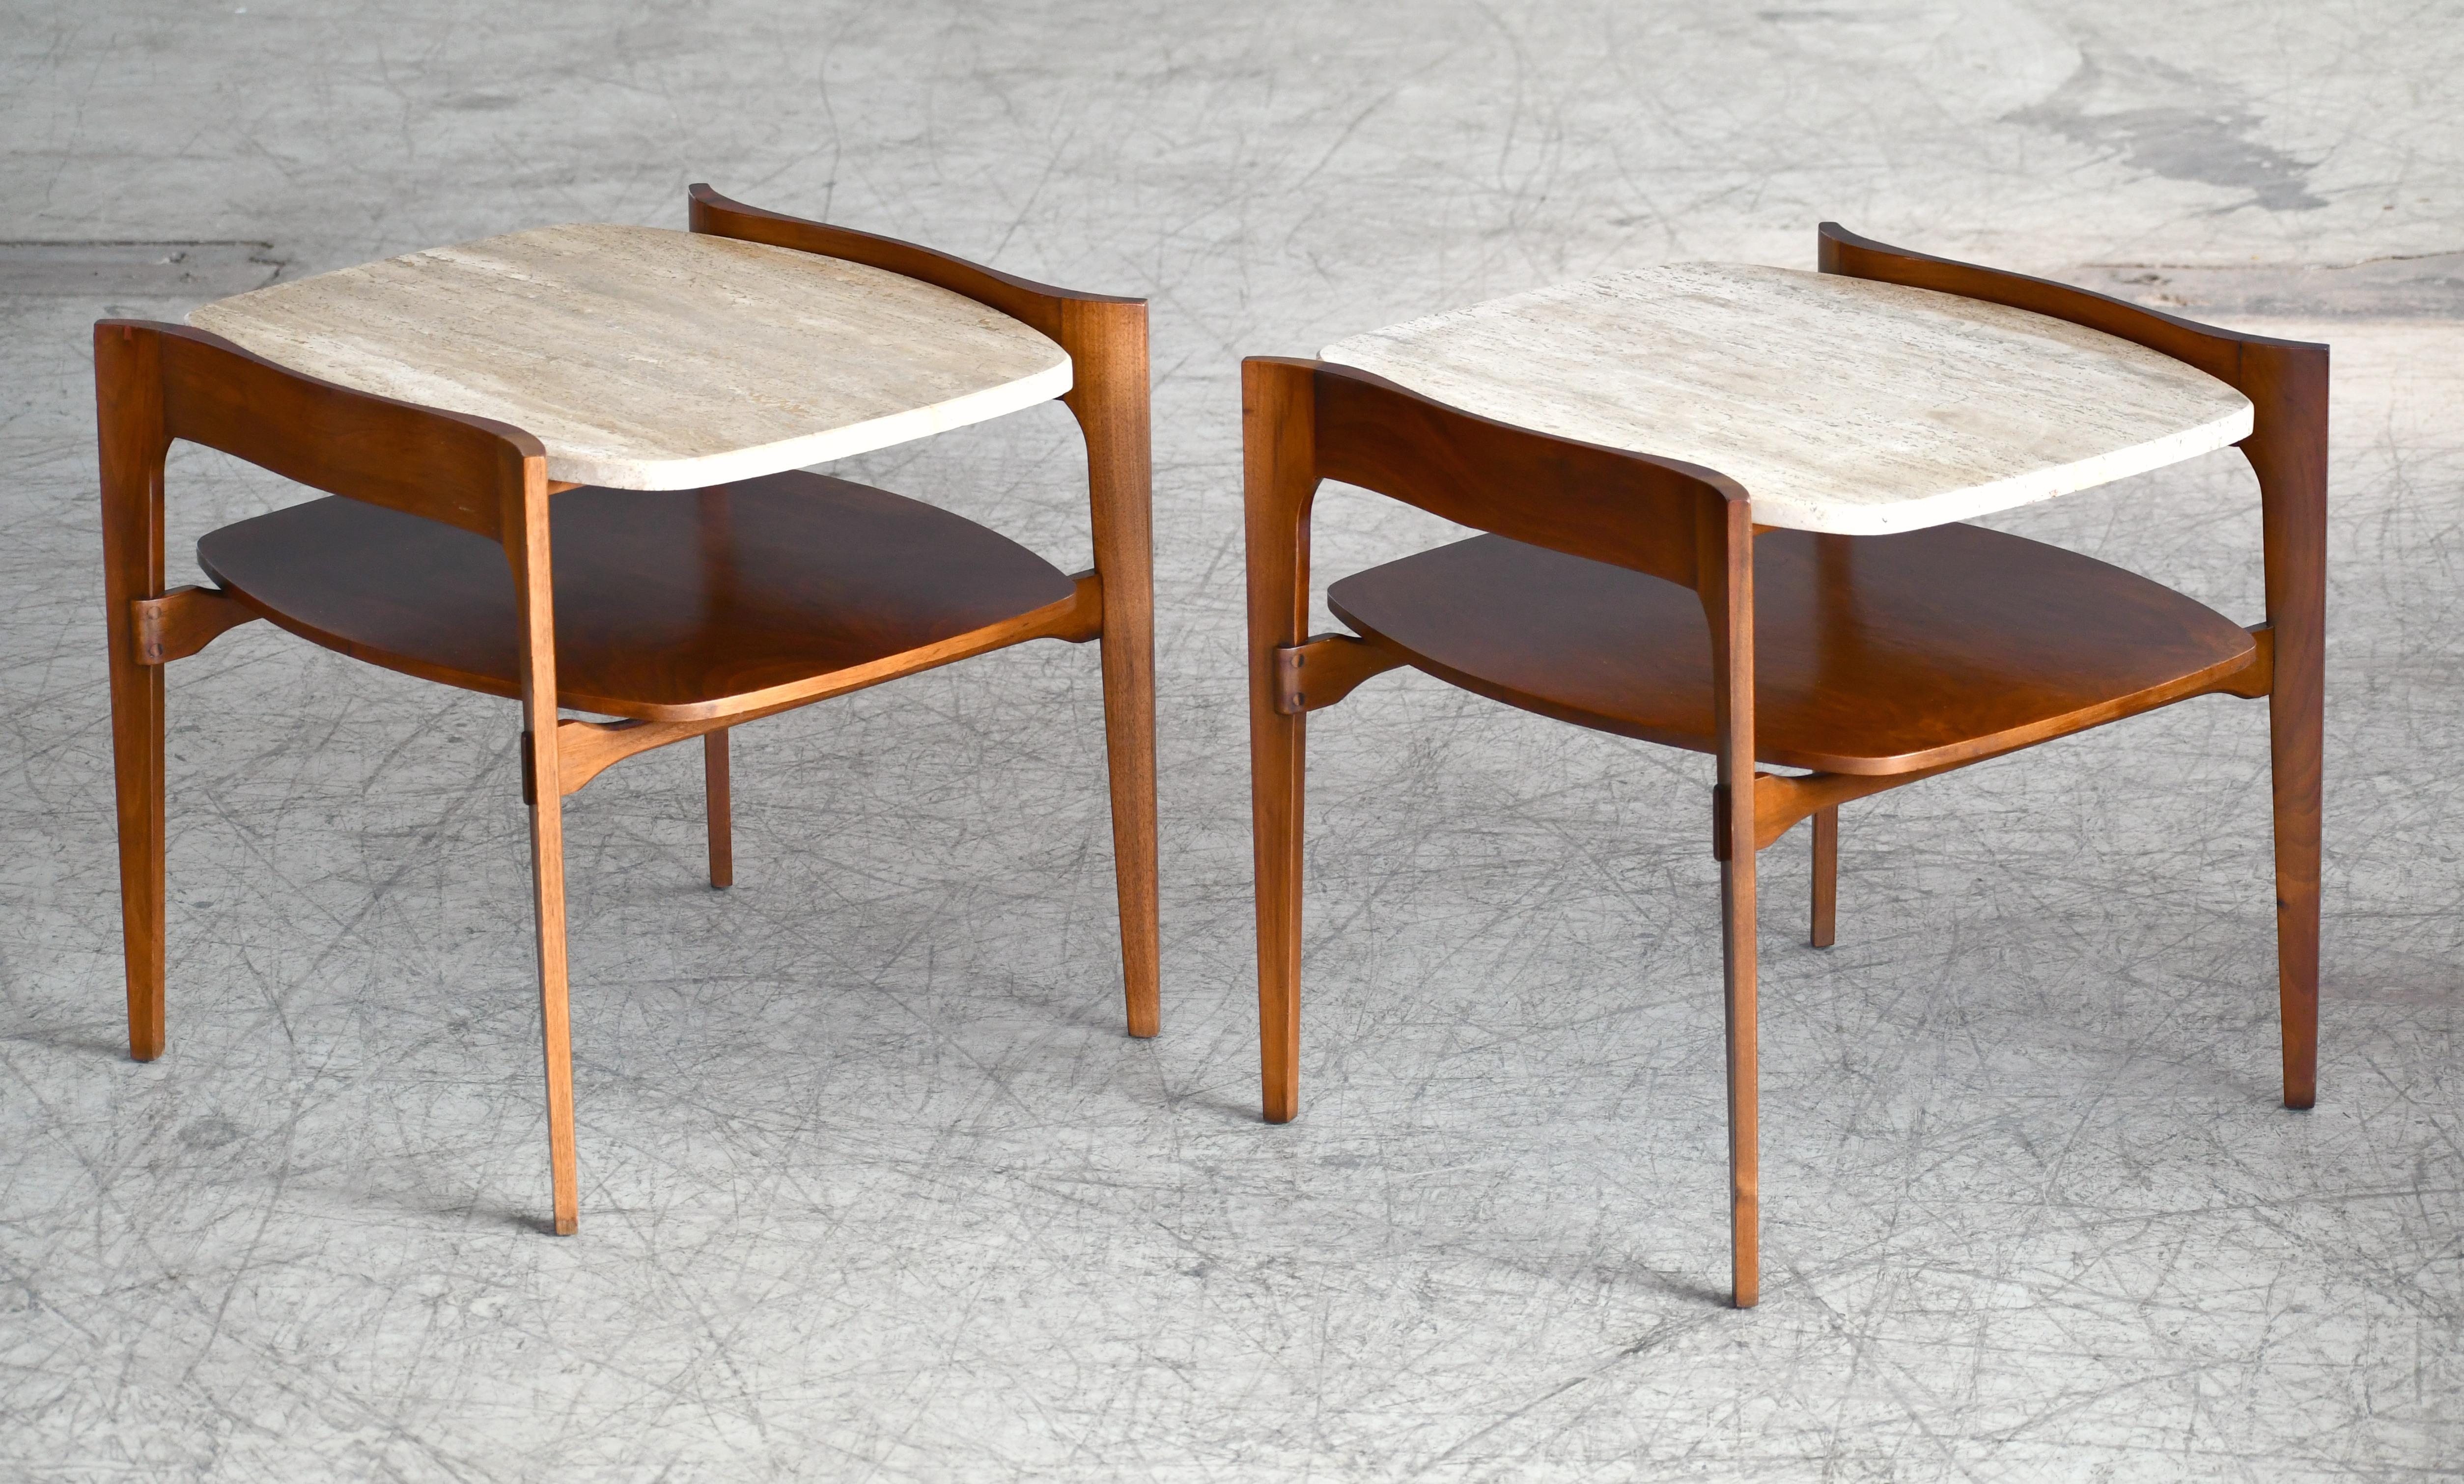 Fabulous boat tail shaped side or end tables designed by Bertha Schaefer for M. Singer and produced in the 1950s. Very sculptural walnut frames with 